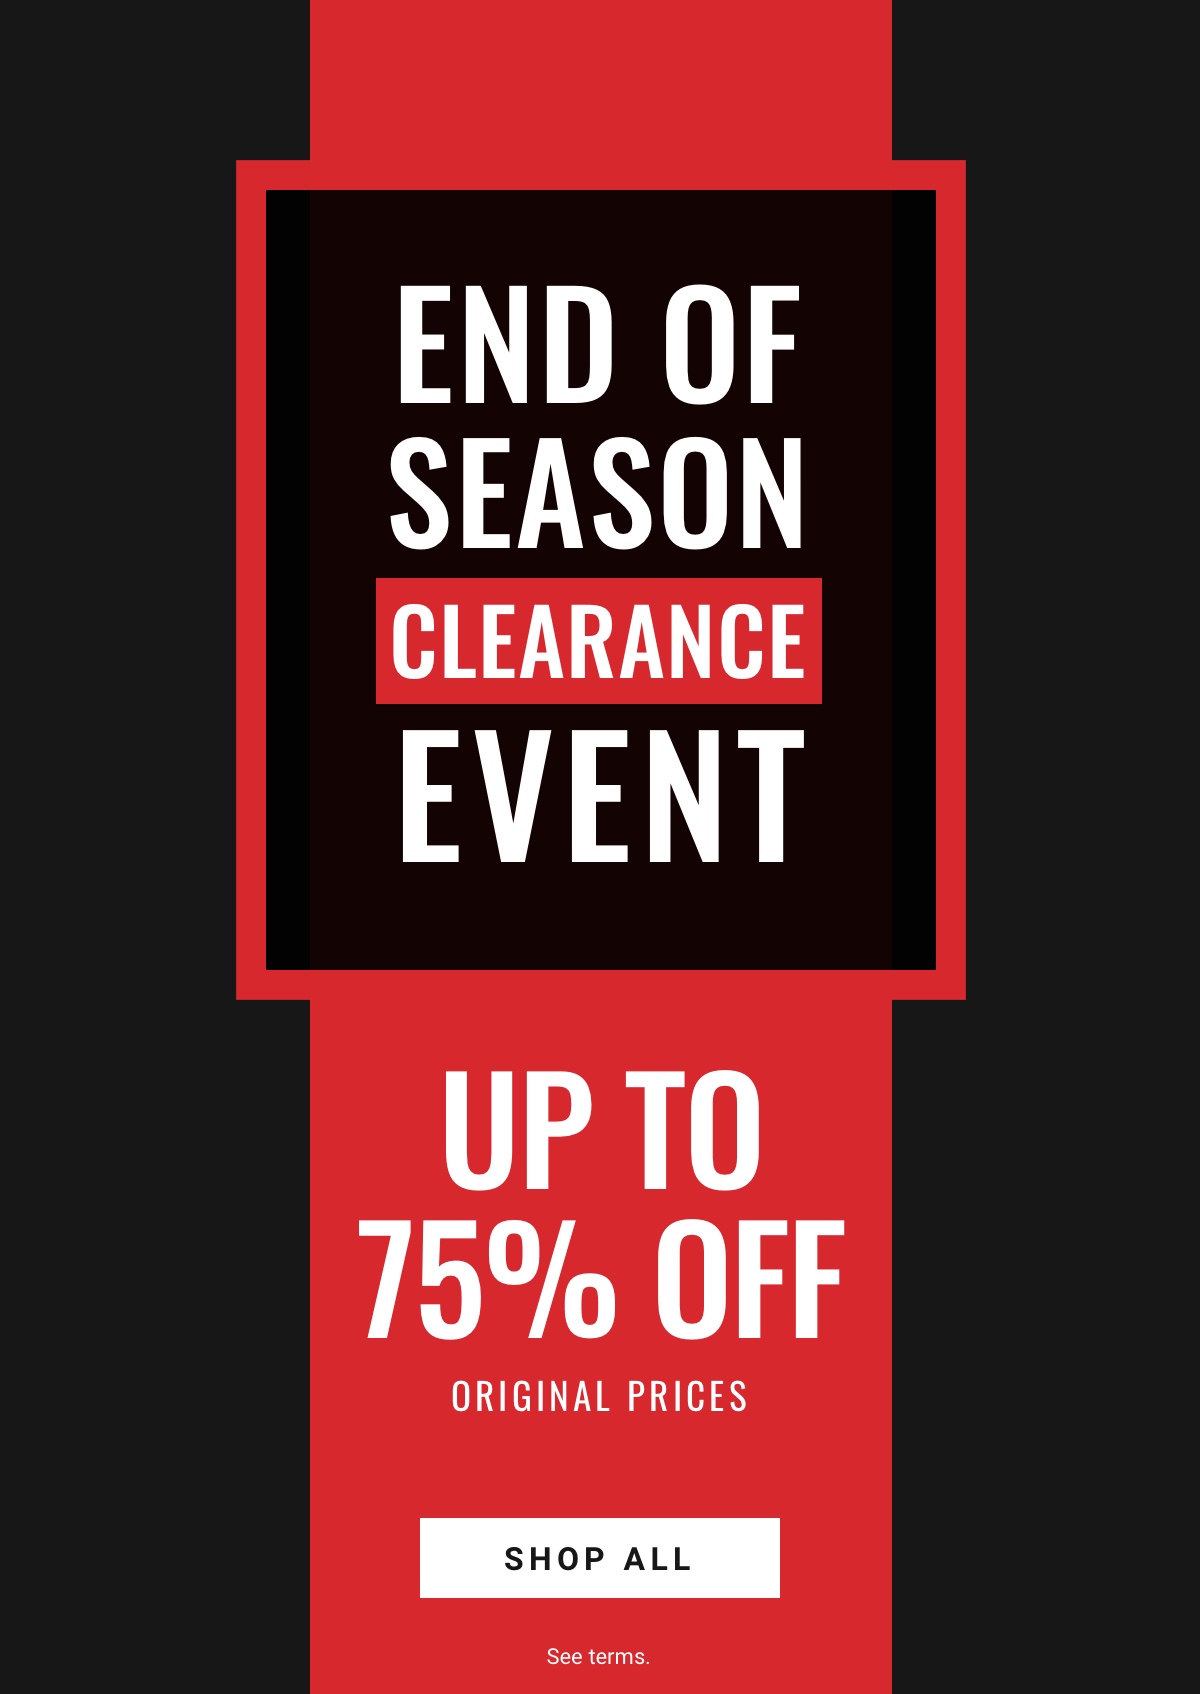 End of Season Clearance Event Up to 75% Off Original Prices Shop All